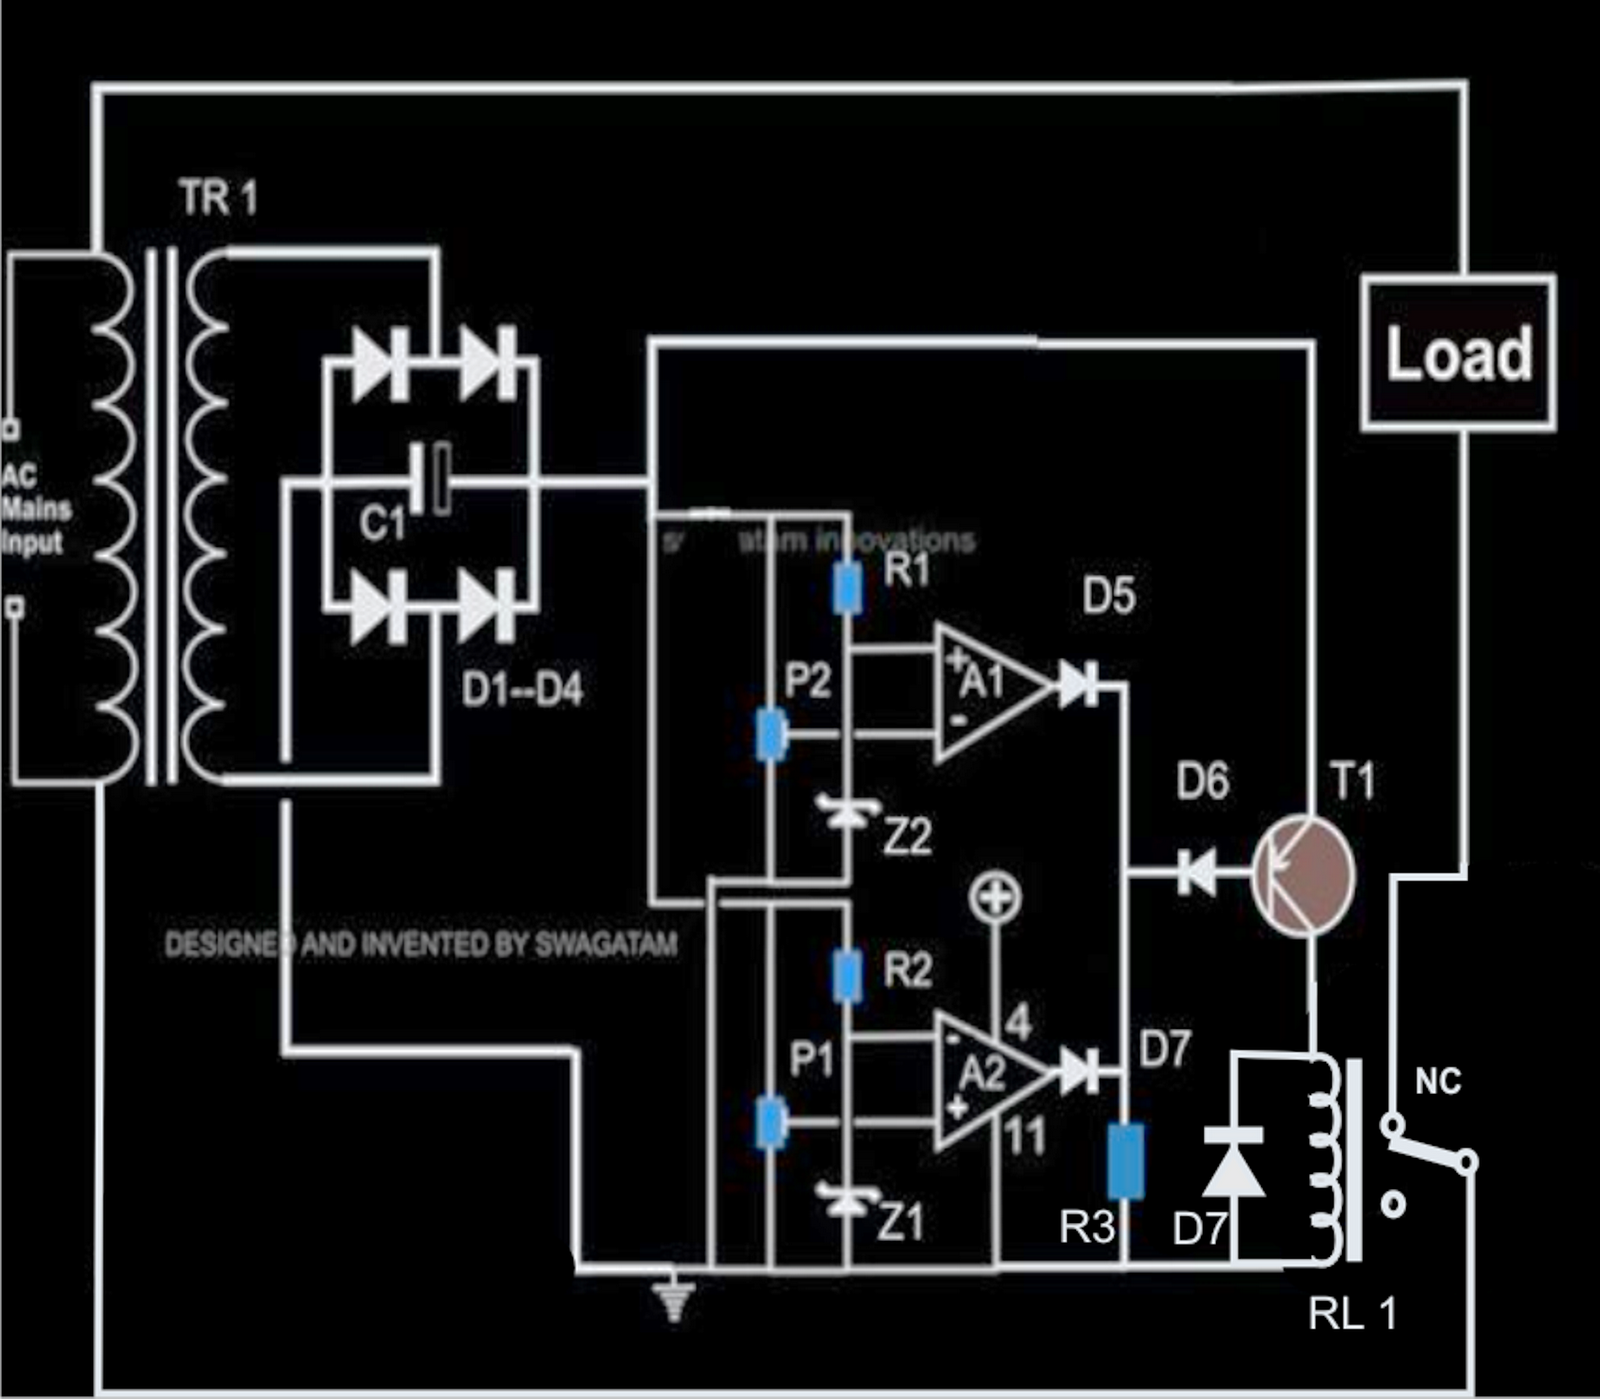 Simple Mains High and Low Voltage Protector Circuit, Using IC 741